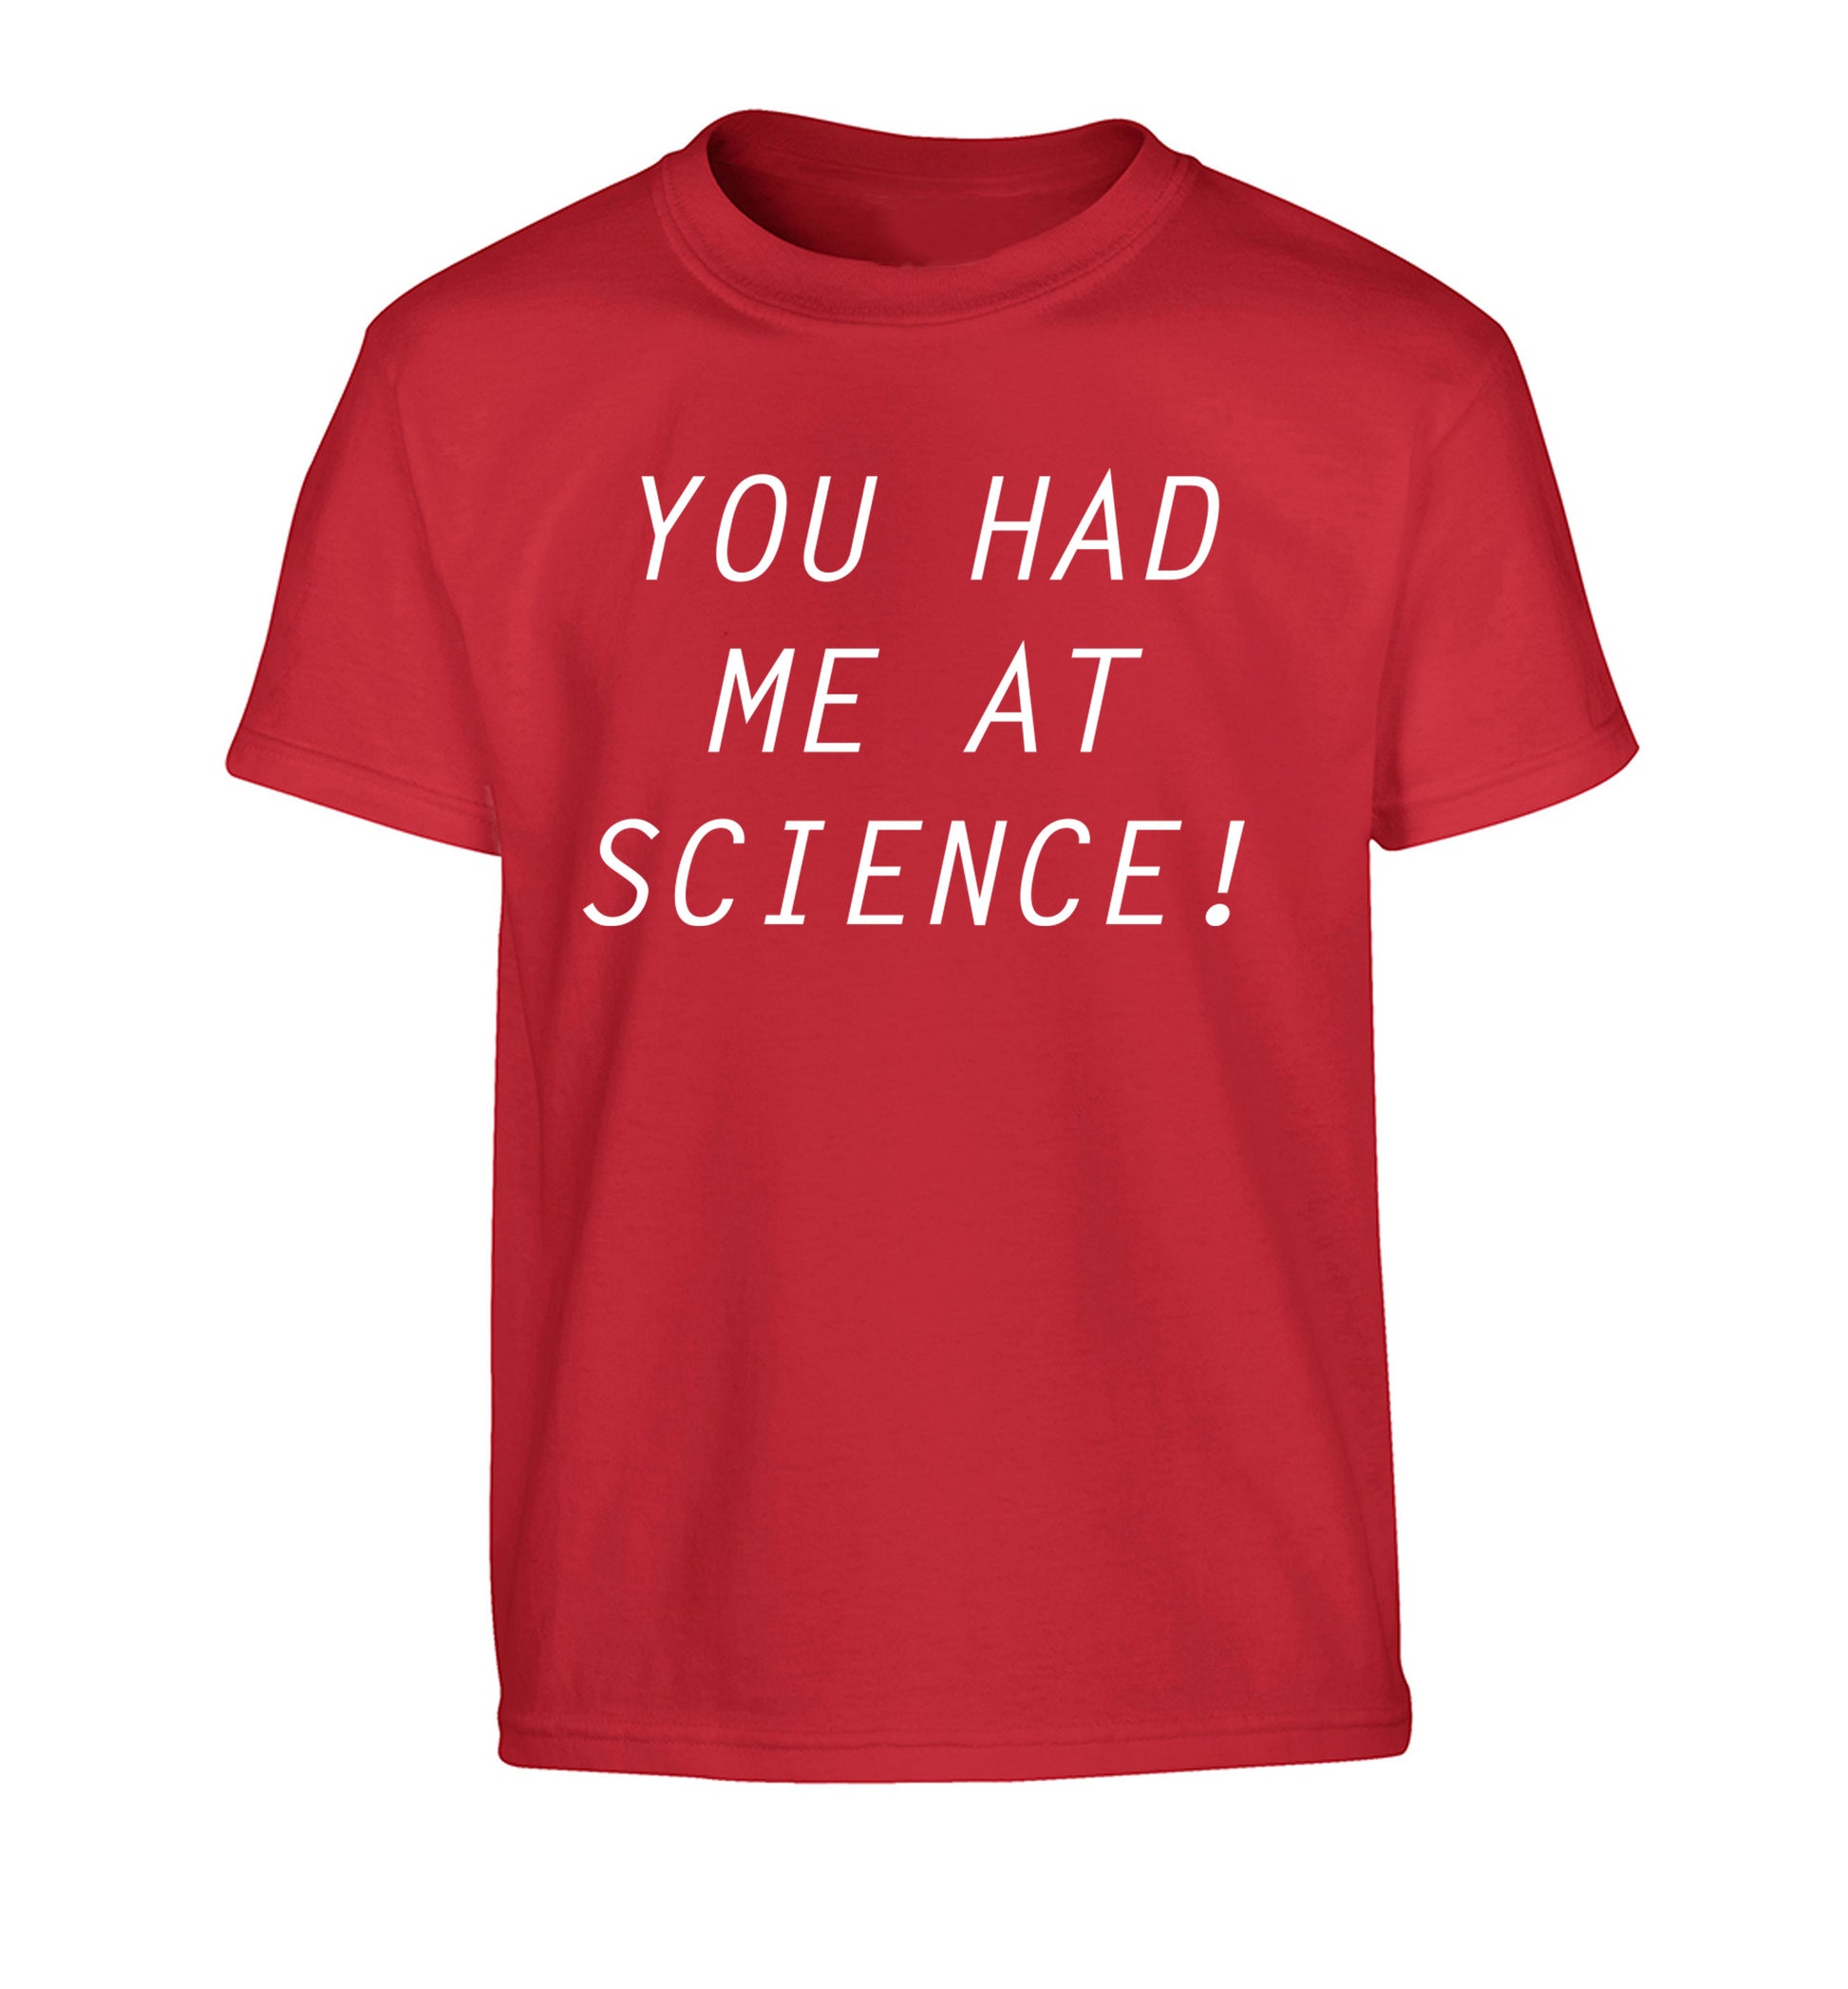 You had me at science Children's red Tshirt 12-14 Years